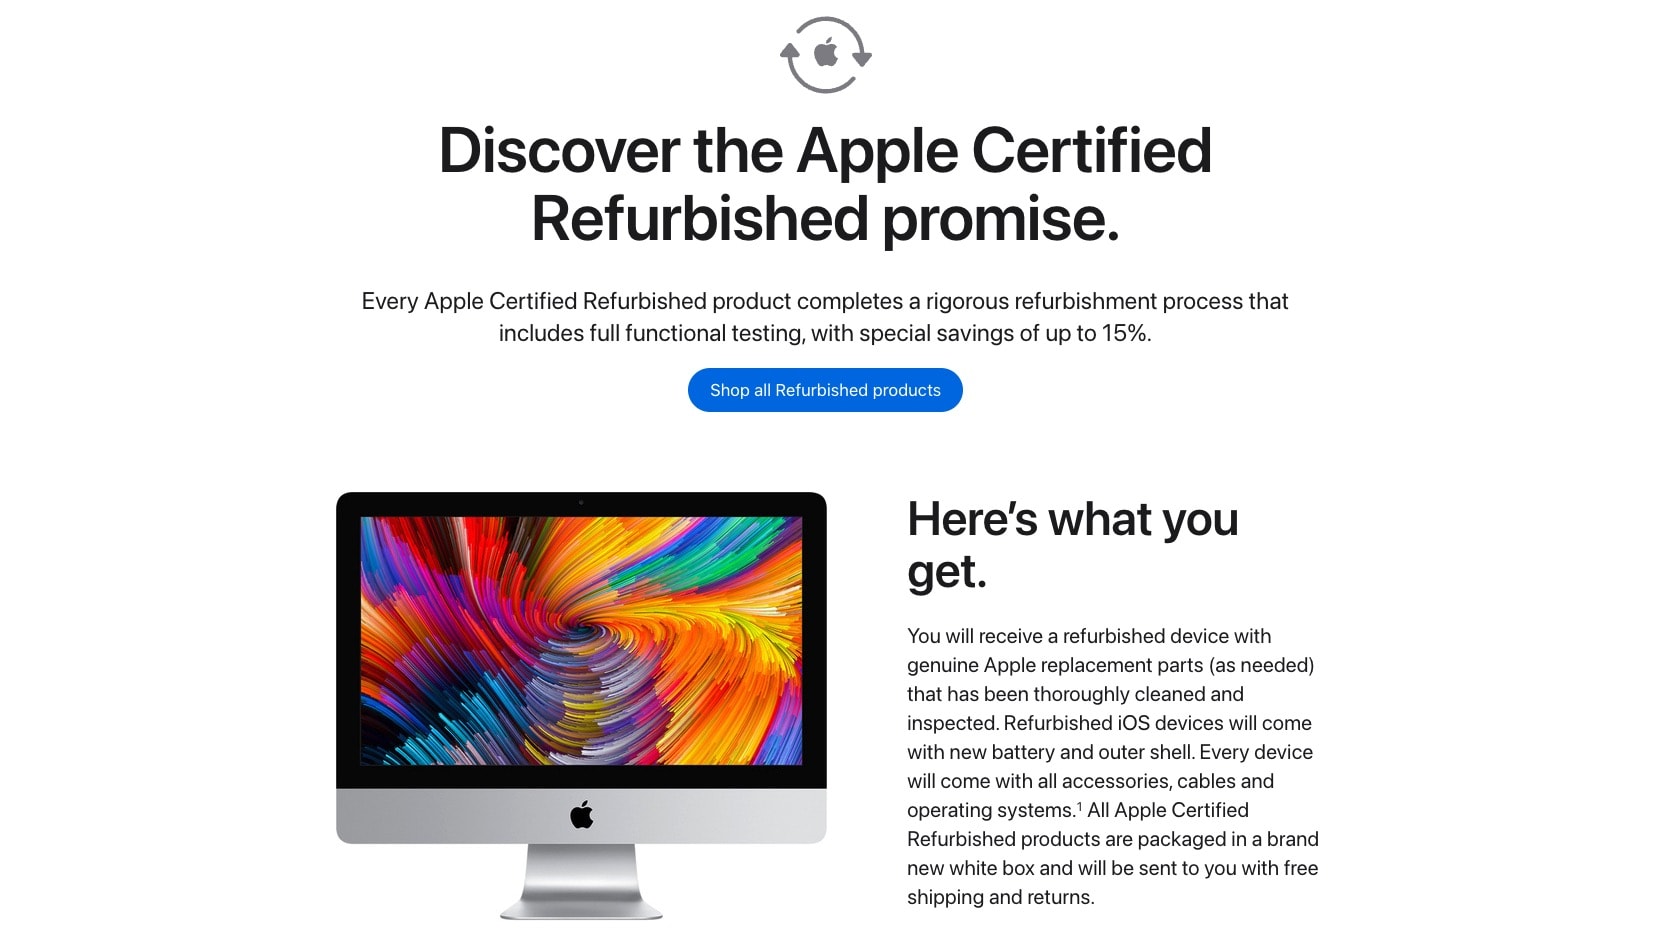 Apple Certified Refurbished Store promise